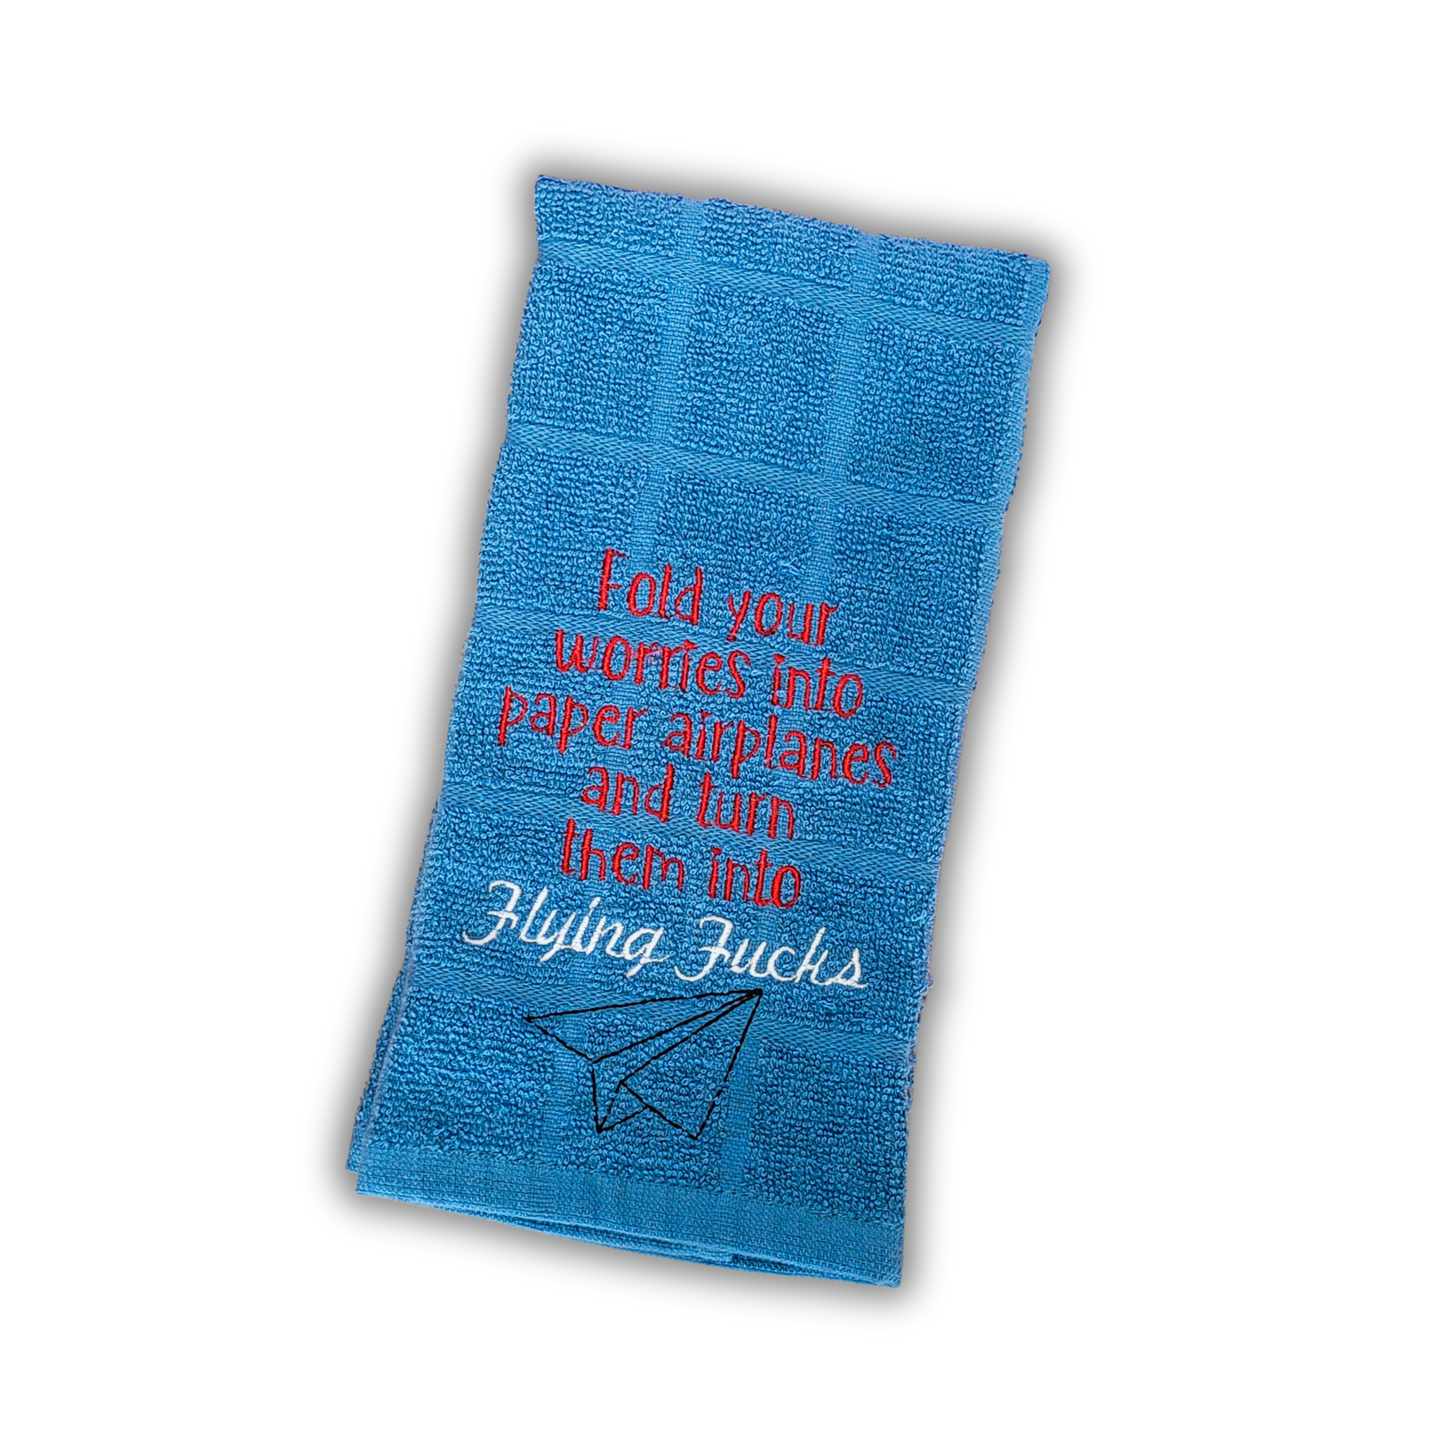 Fold Your Worries Into Paper Airplanes and Turn Them Into Flying Fucks Embroidered Hand & Tea Towel